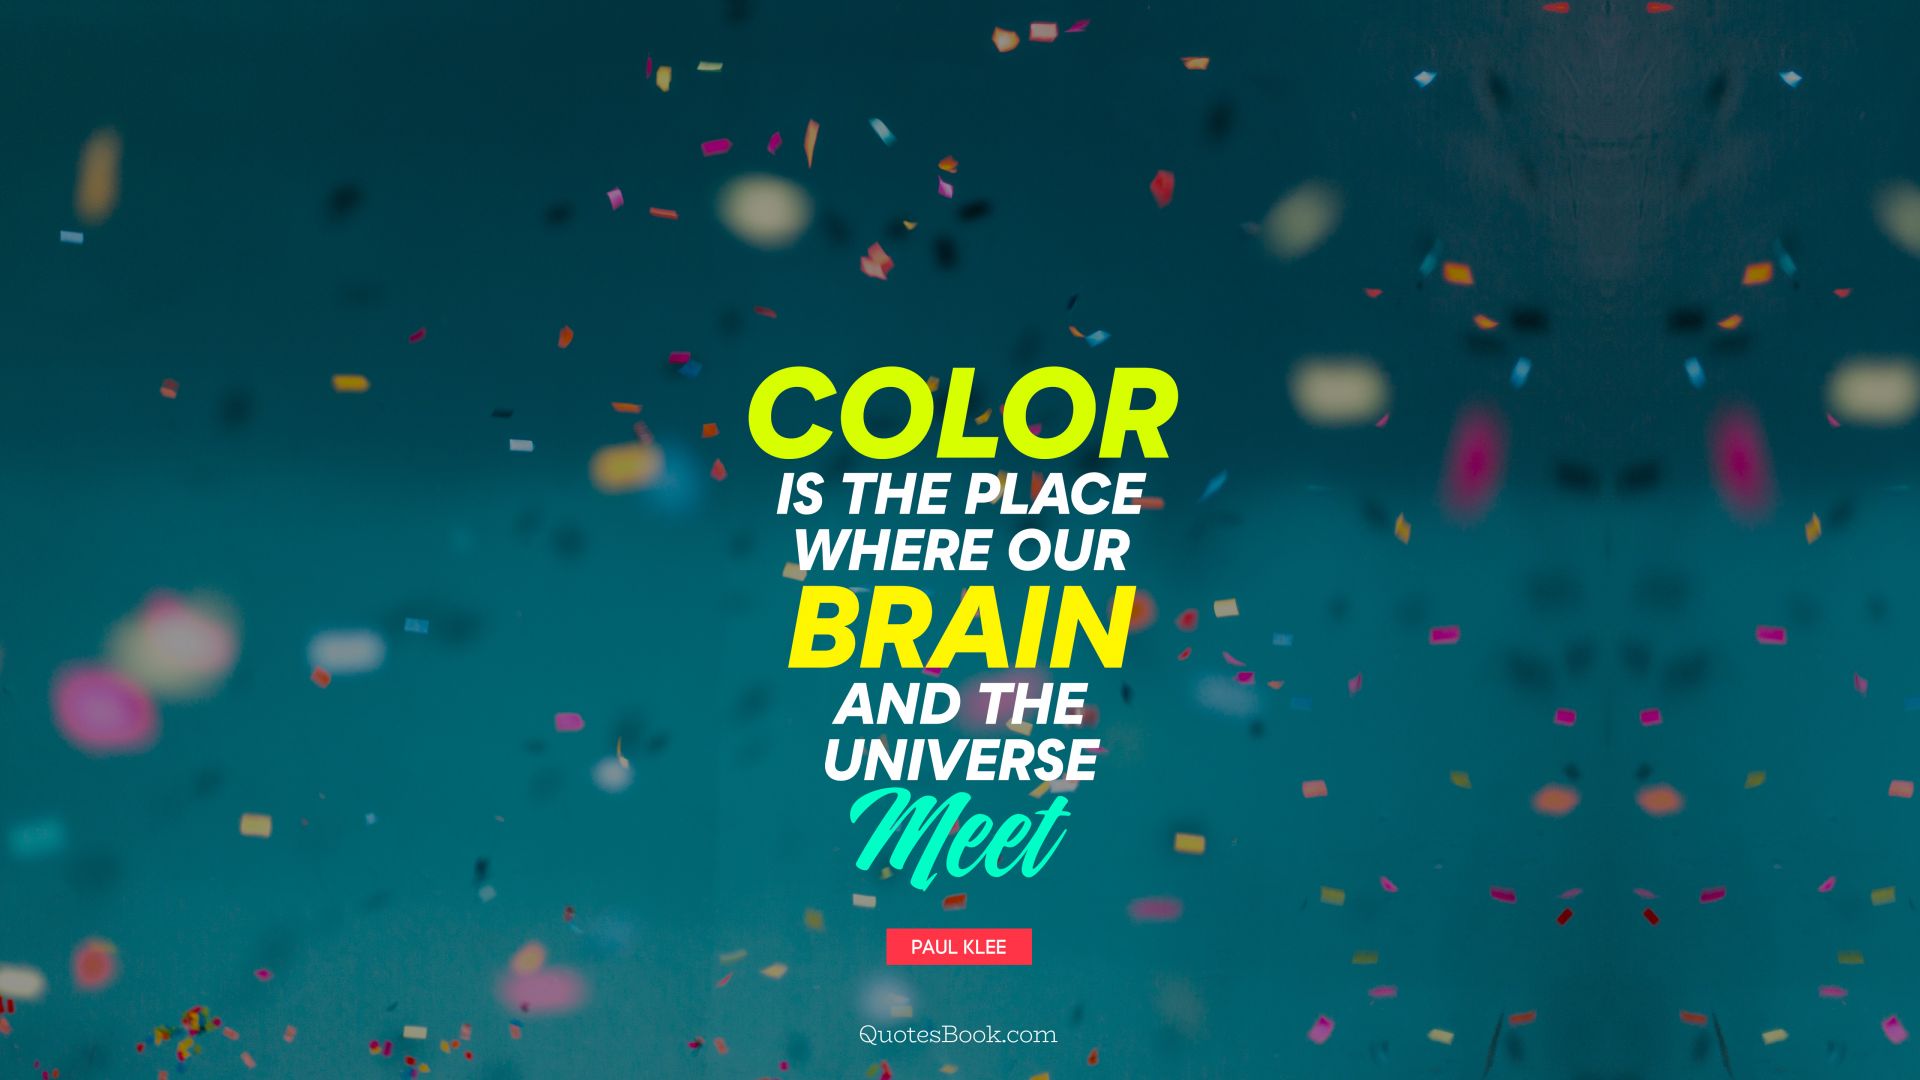 Color is the place where our brain and the universe meet. - Quote by Paul Klee